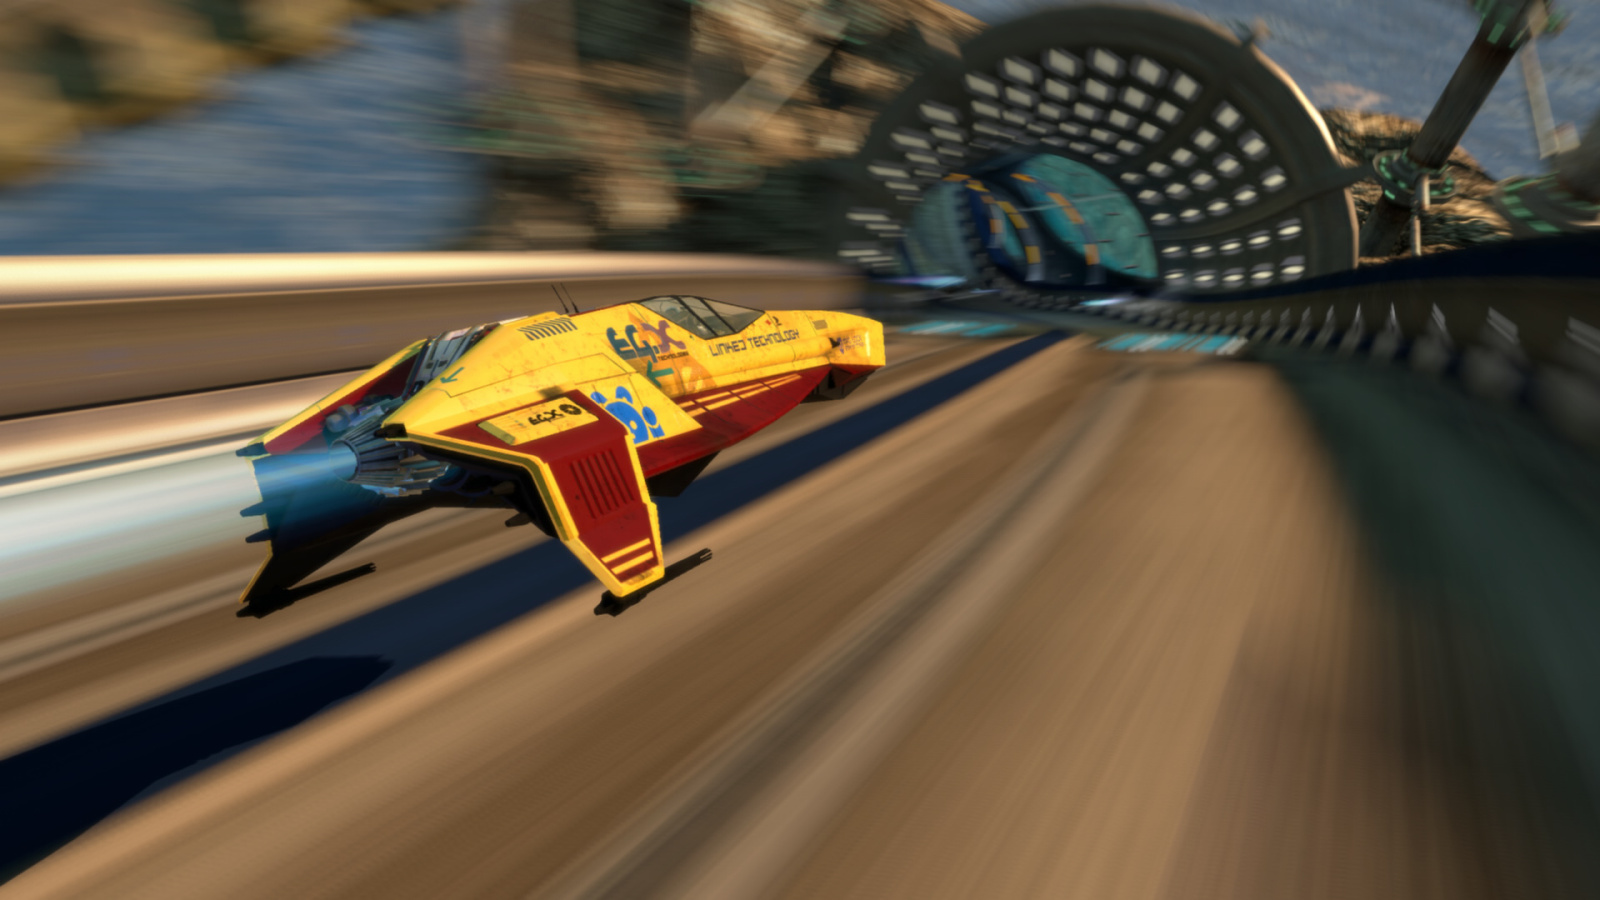 wipeout, video game